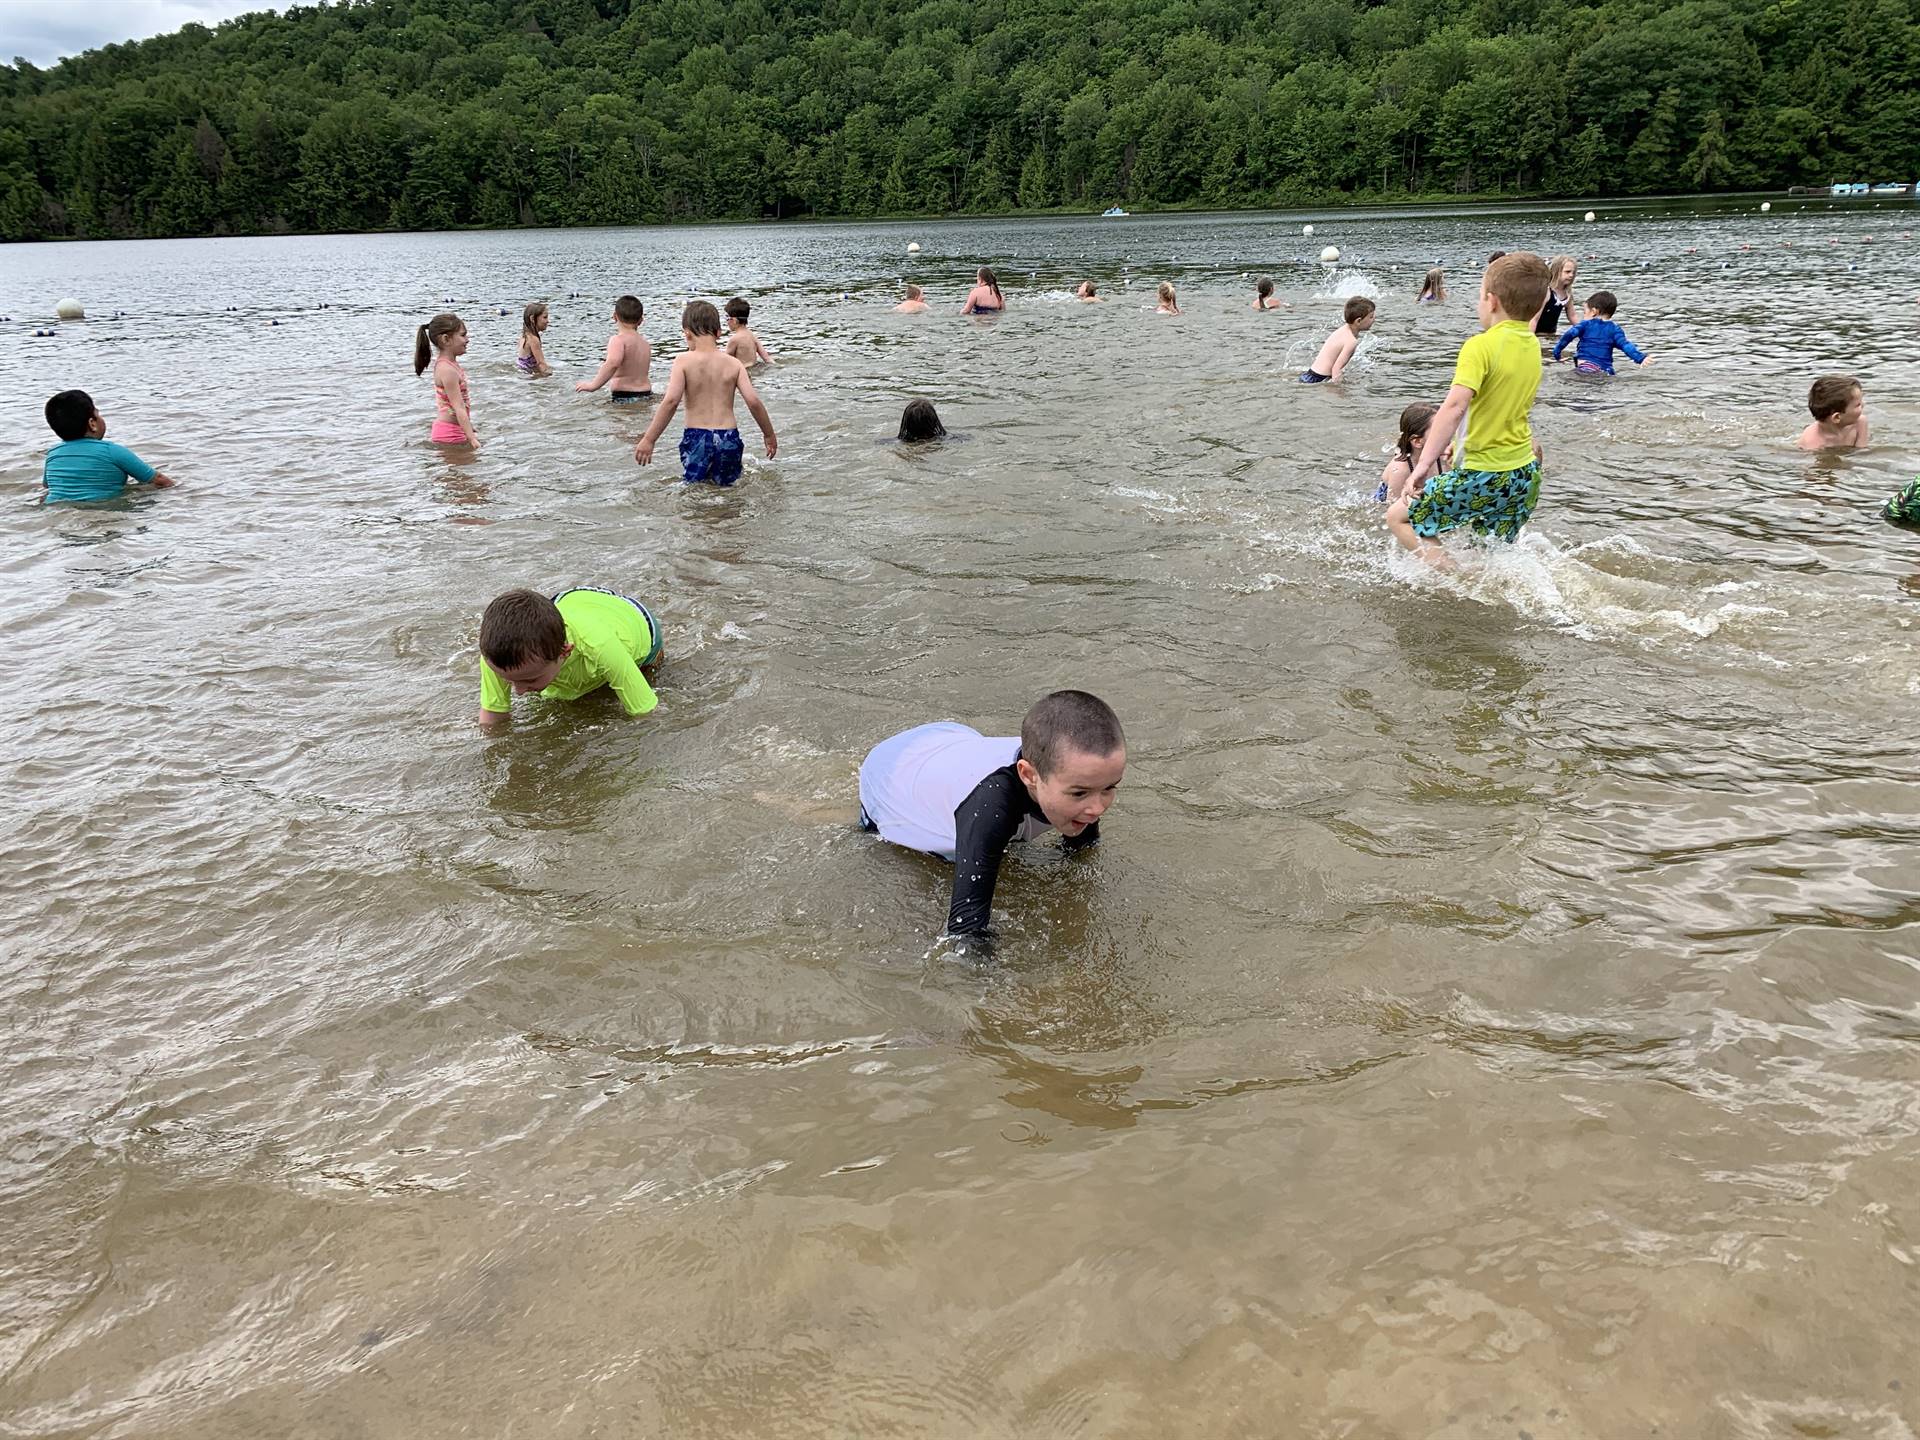 Students swimming together.